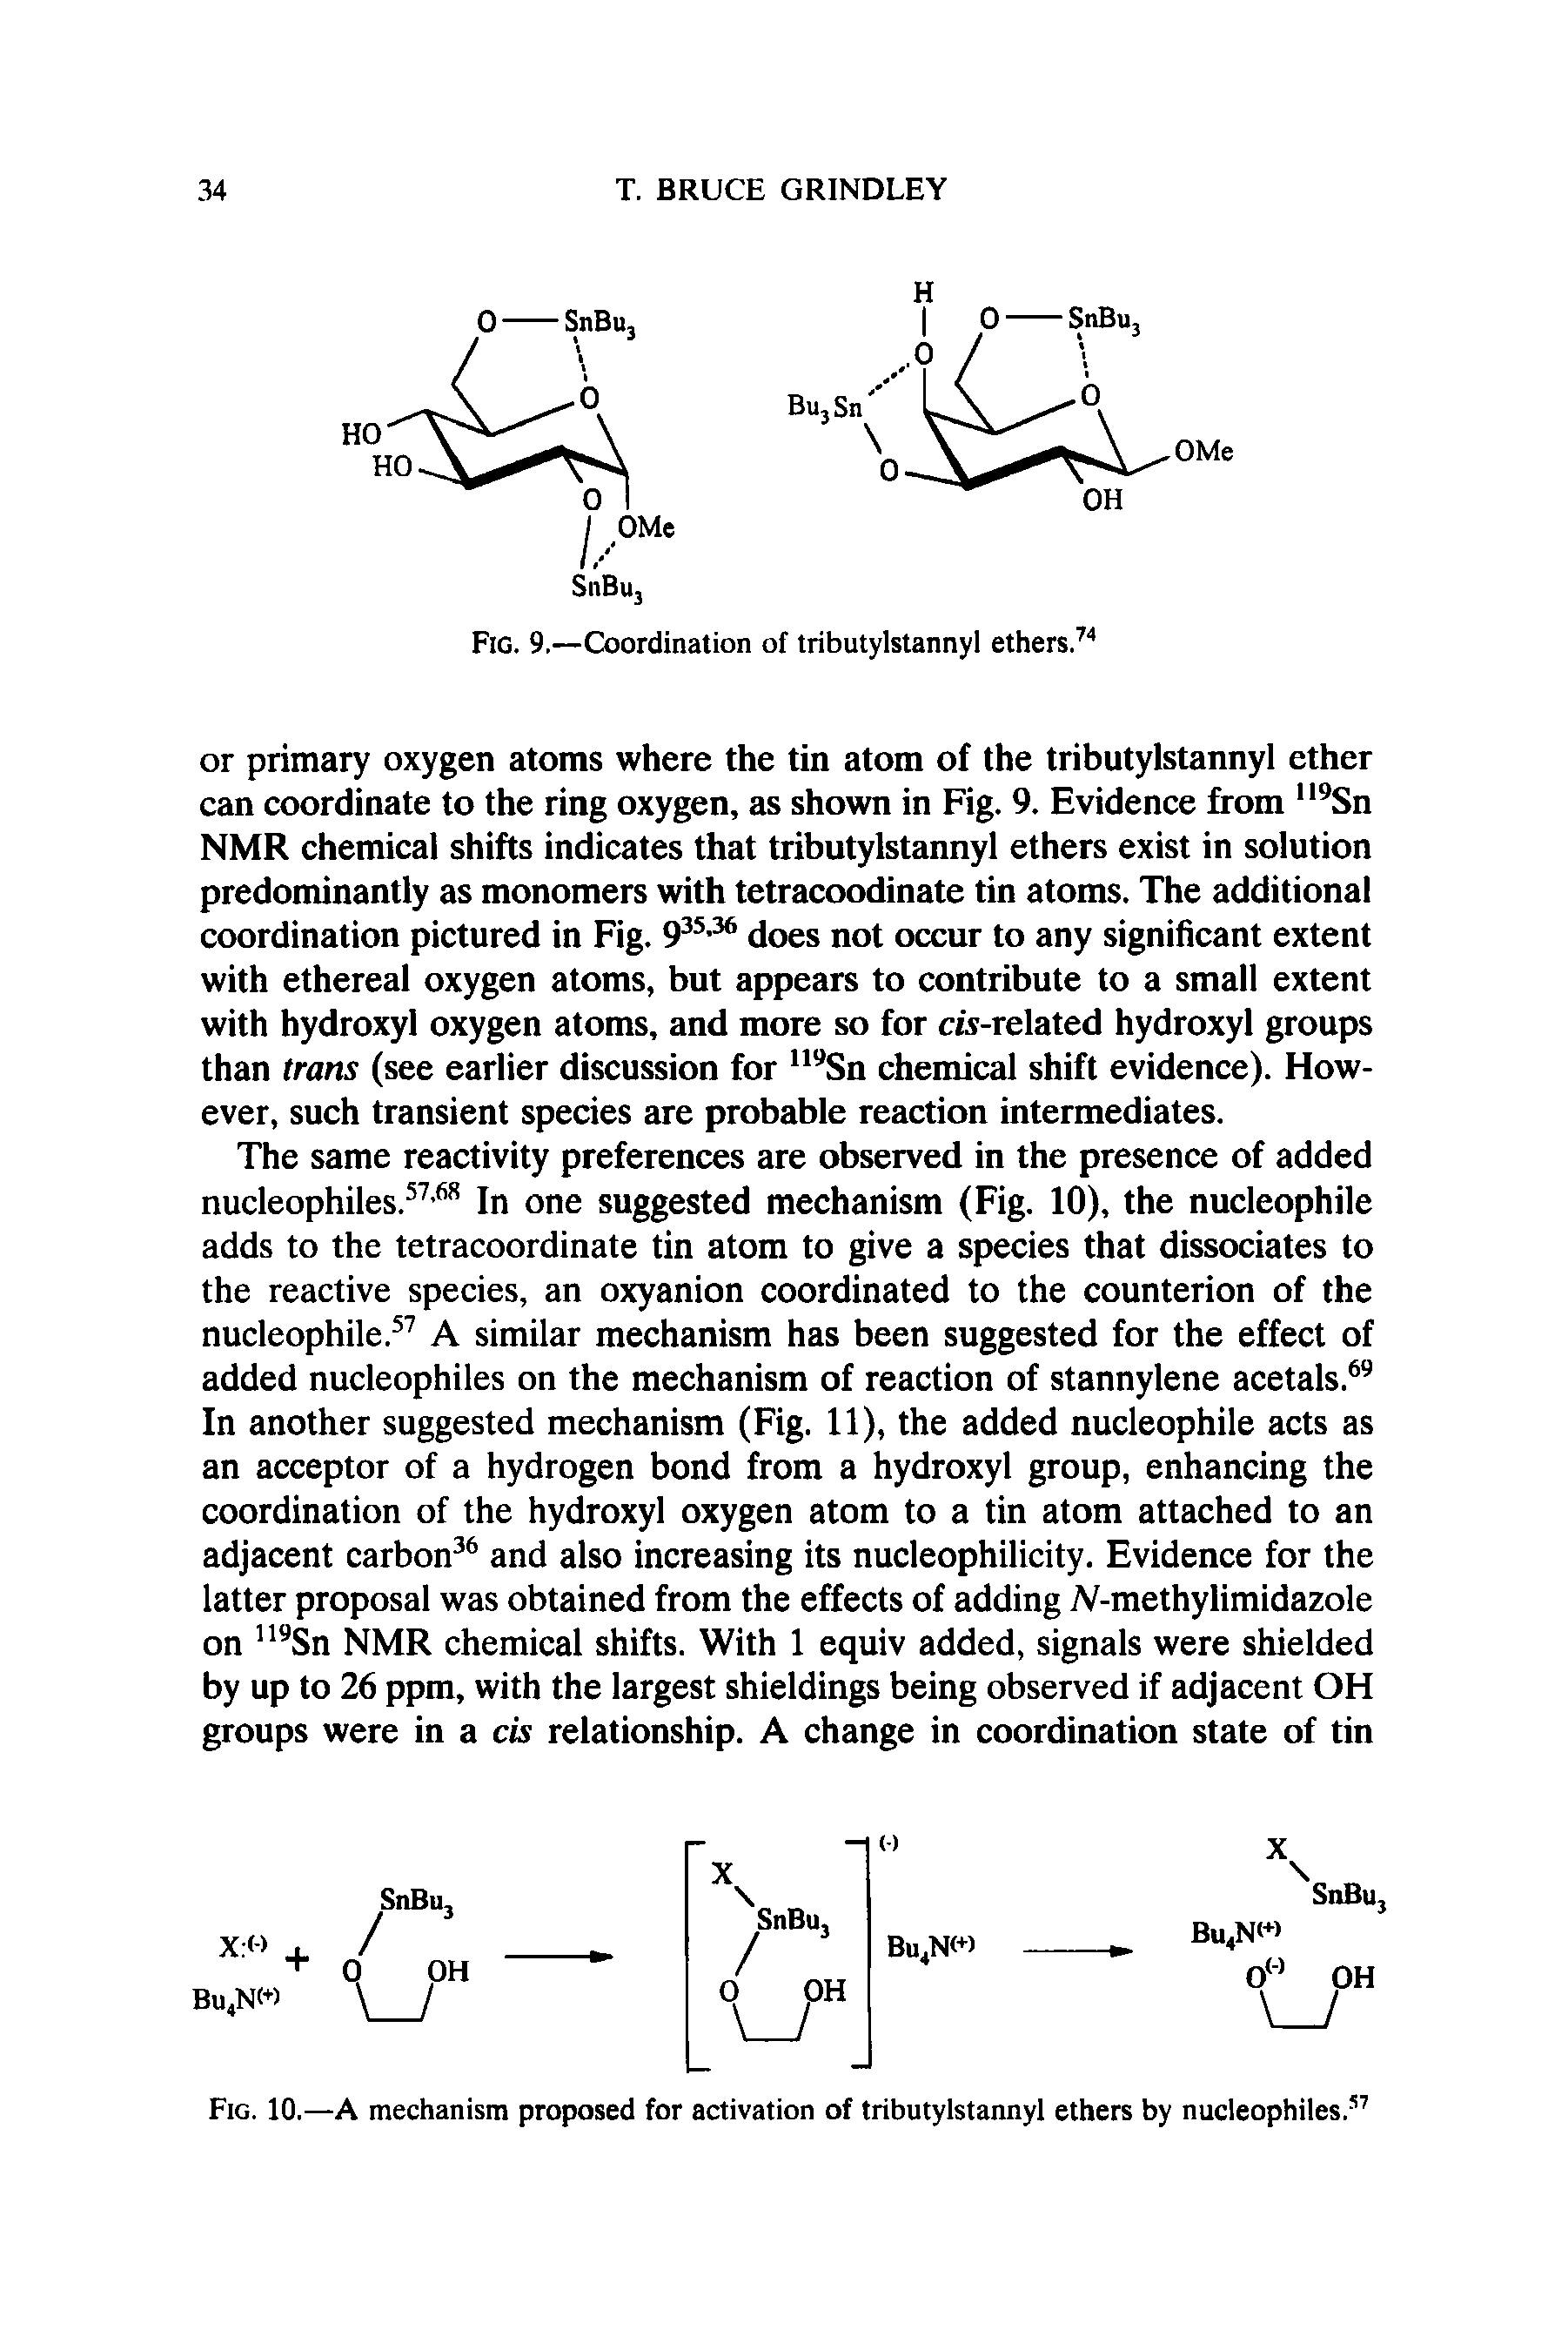 Fig. 10.—A mechanism proposed for activation of tributylstannyl ethers by nucleophiles.57...